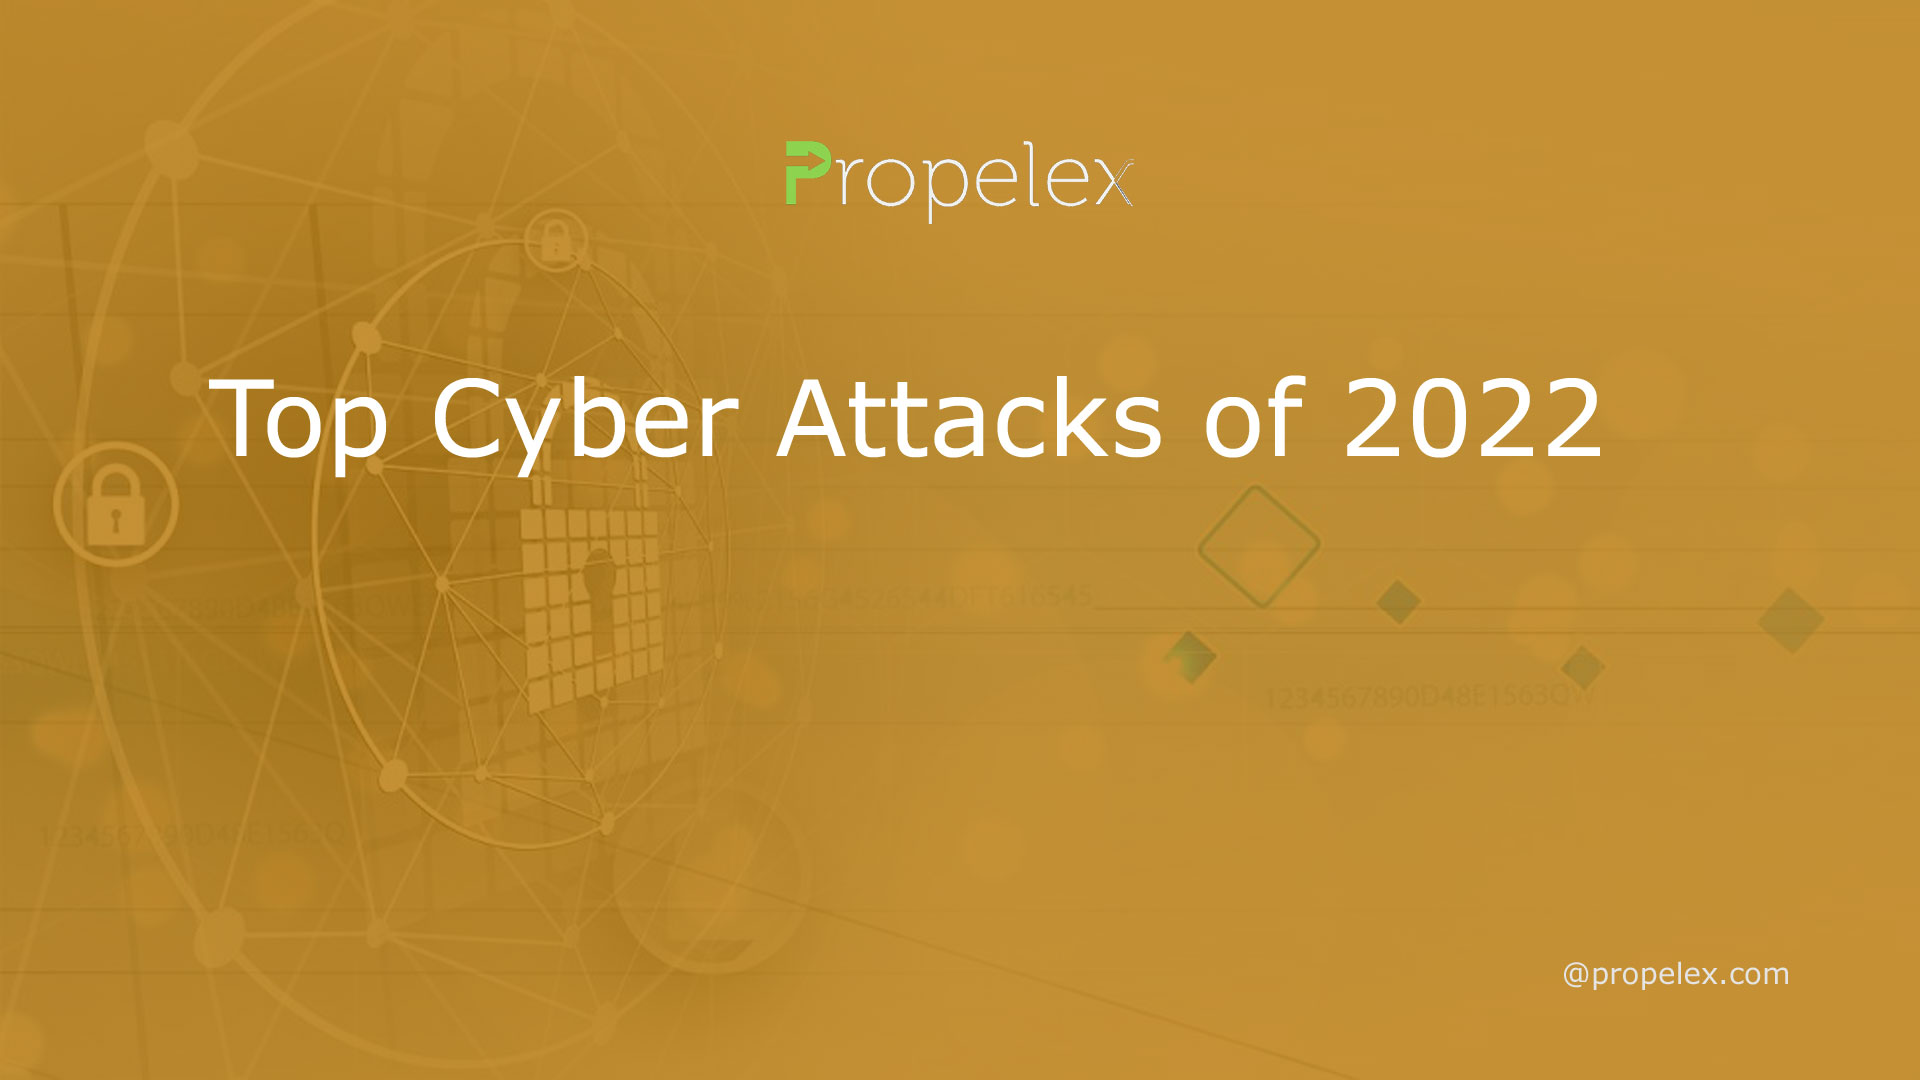 Top Cyber Attacks of 2022